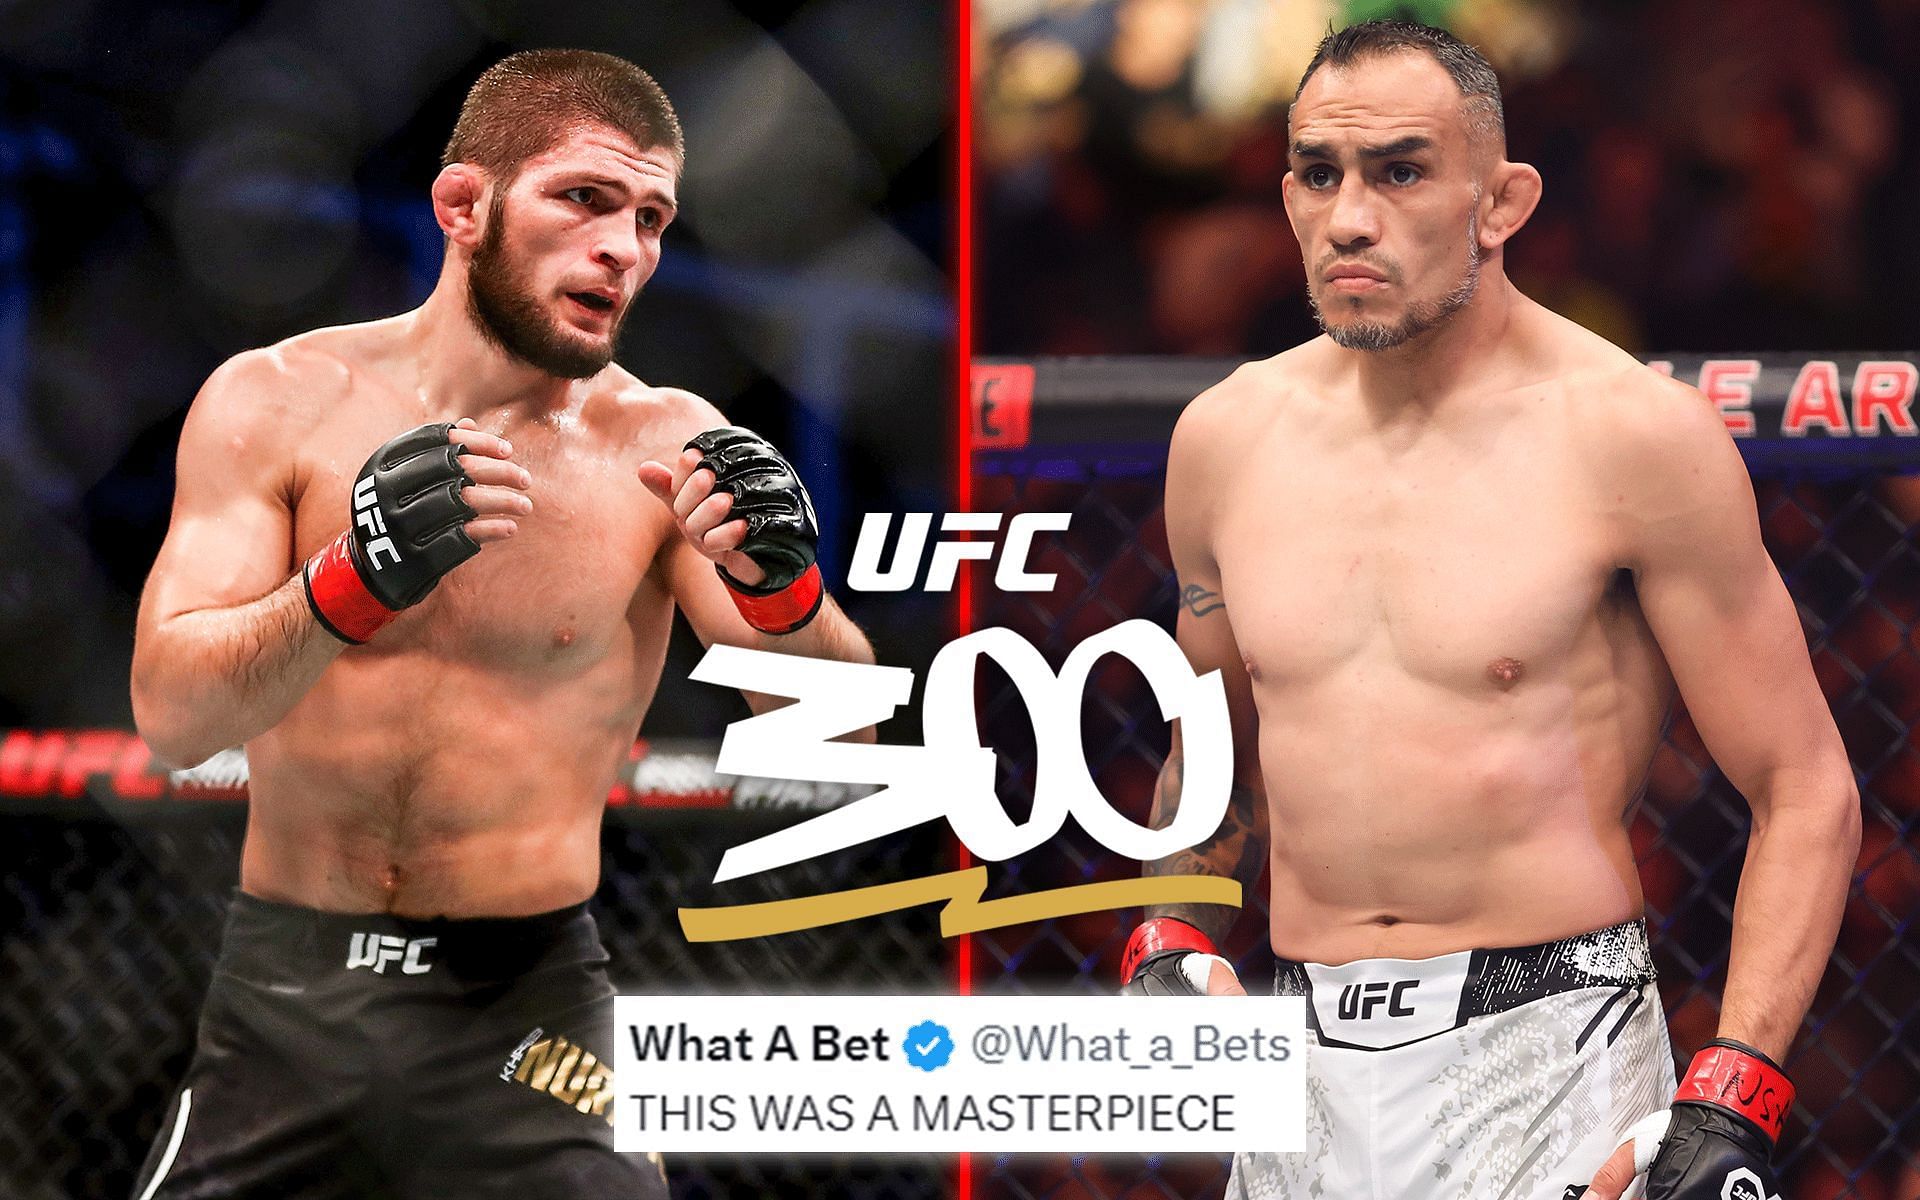 Fans react to the new UFC 300 trailer featuring Khabib Nurmagomedov (left) vs. Tony Ferguson (right) [Images courtesy: @ufc on Instagram and Getty]